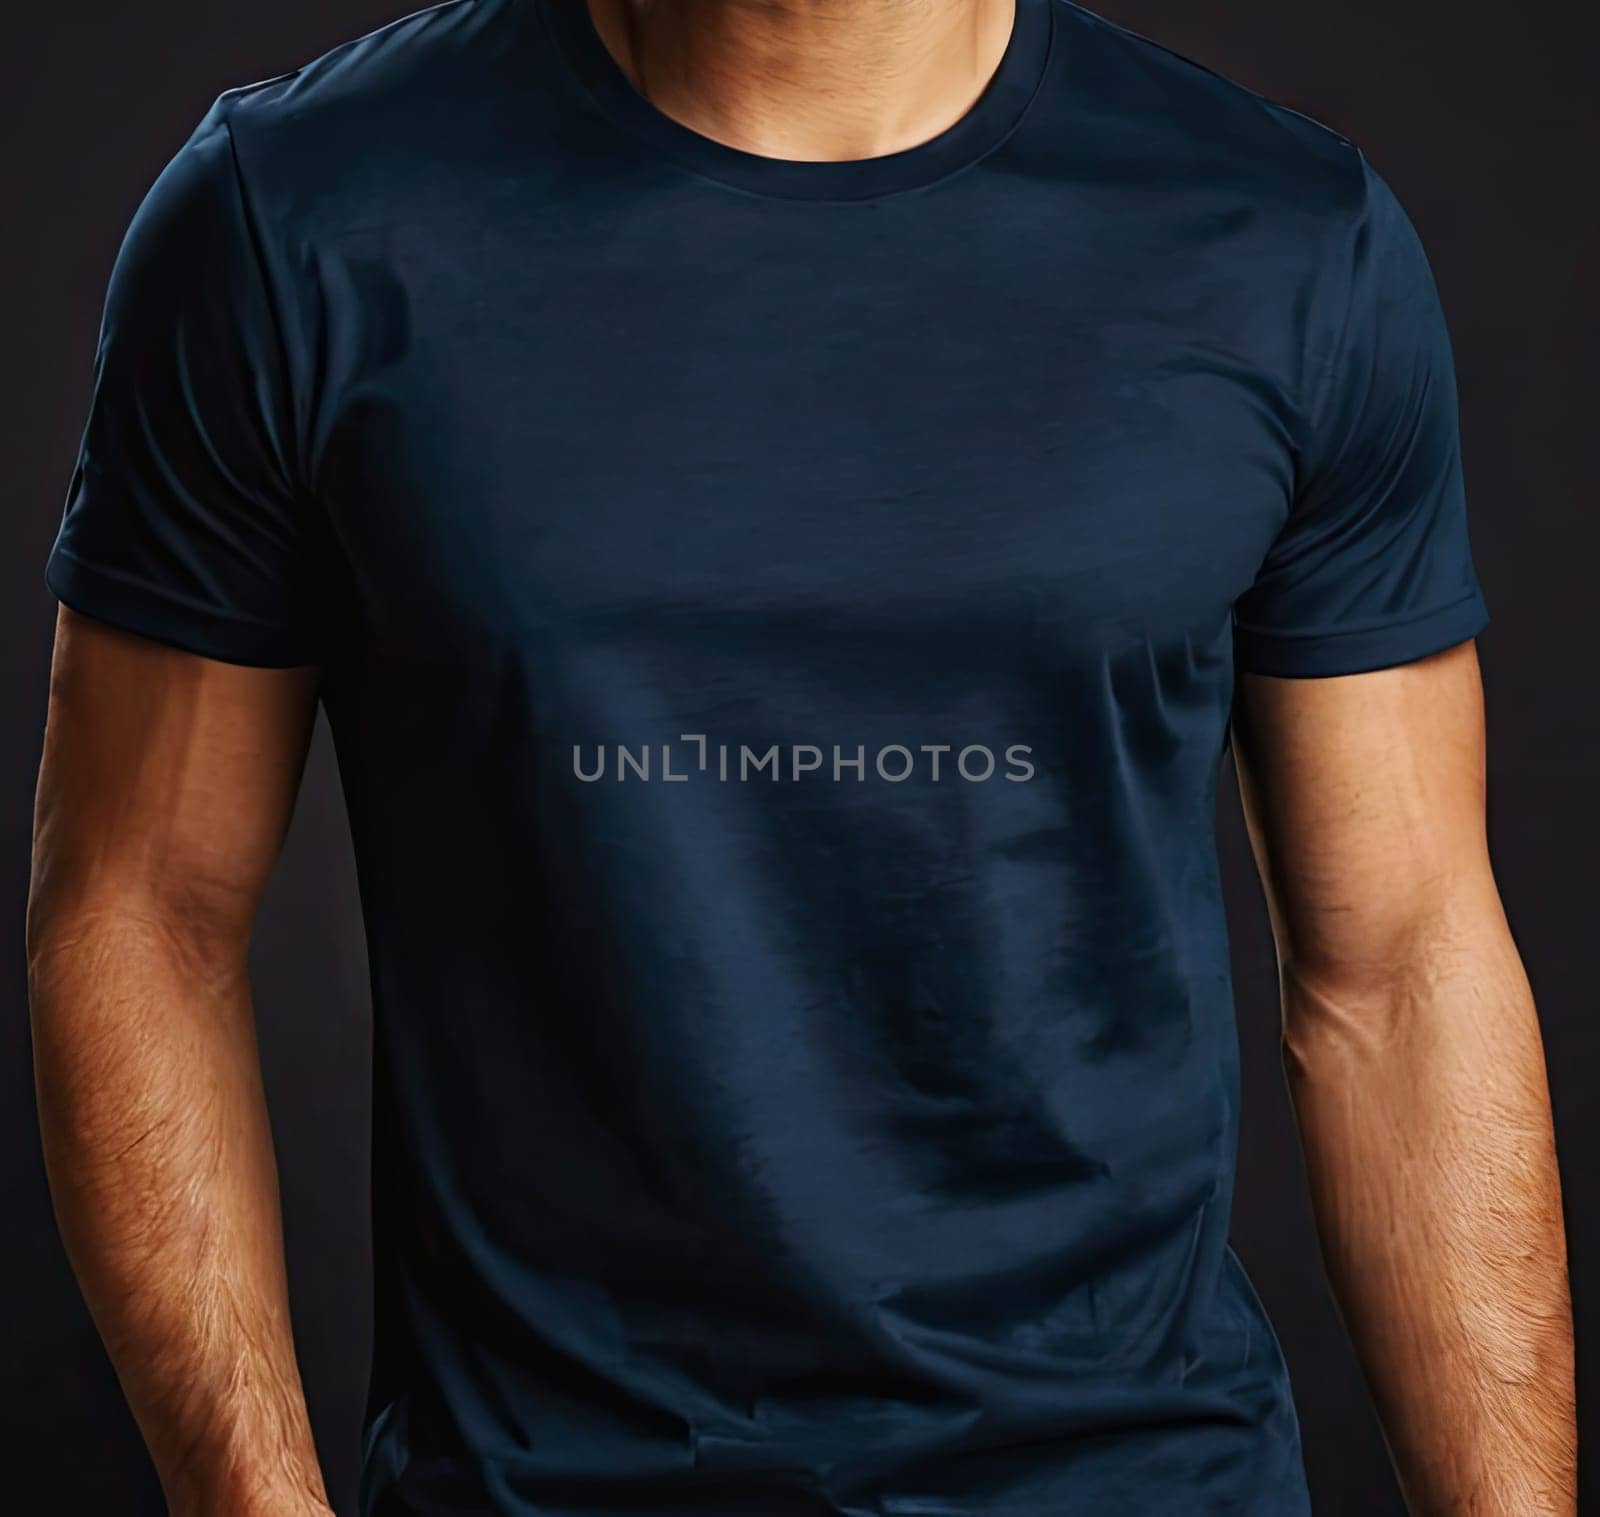 T-shirt template  by Ladouski